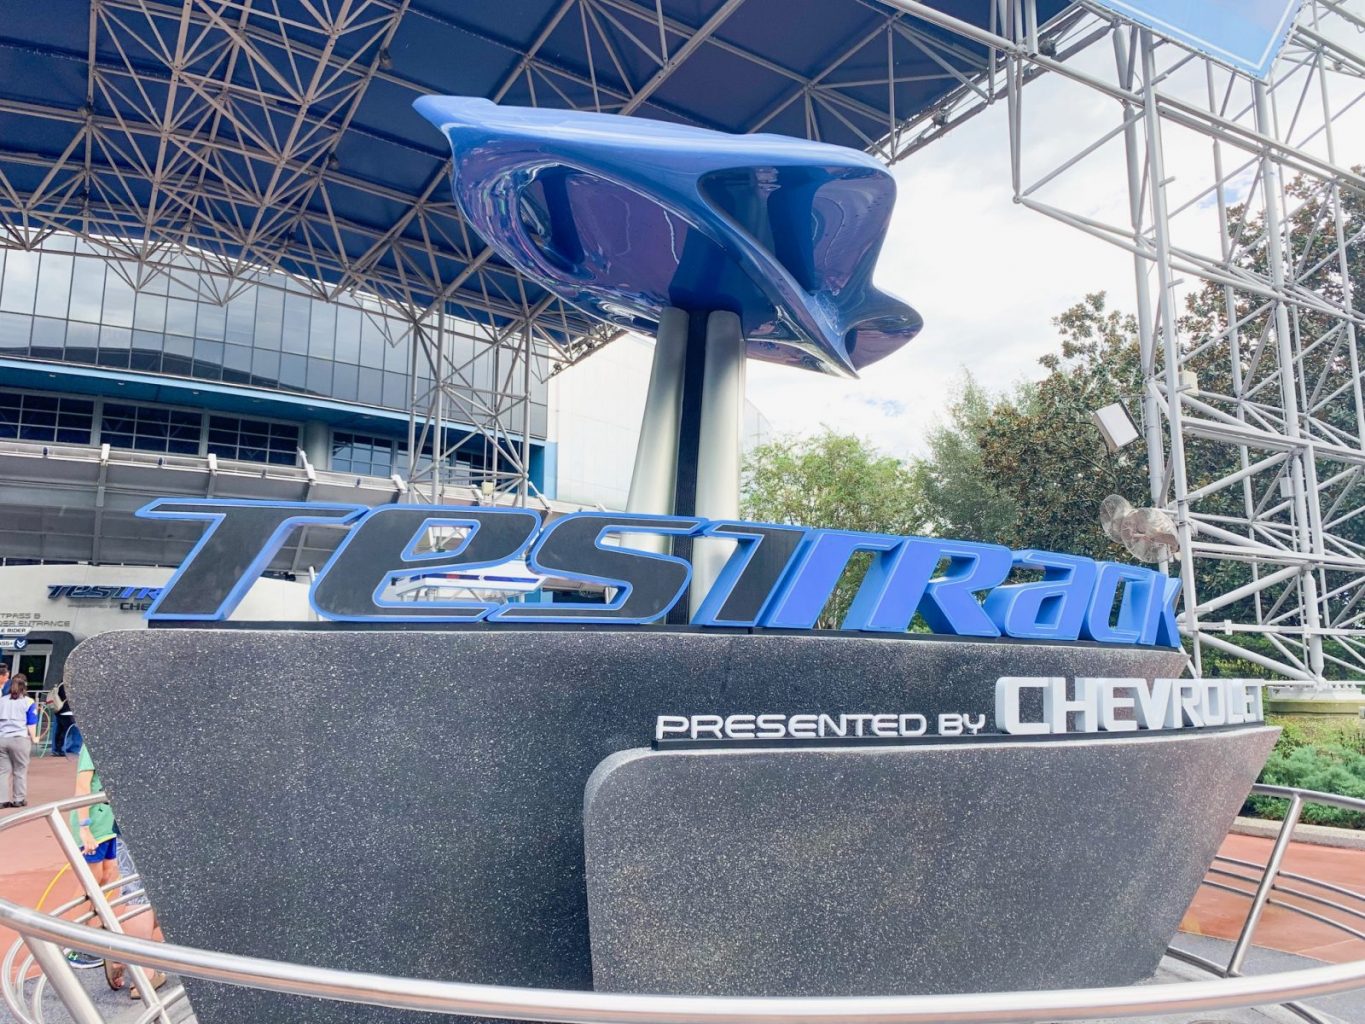 Test Track is one of the best Disney rides for the whole family